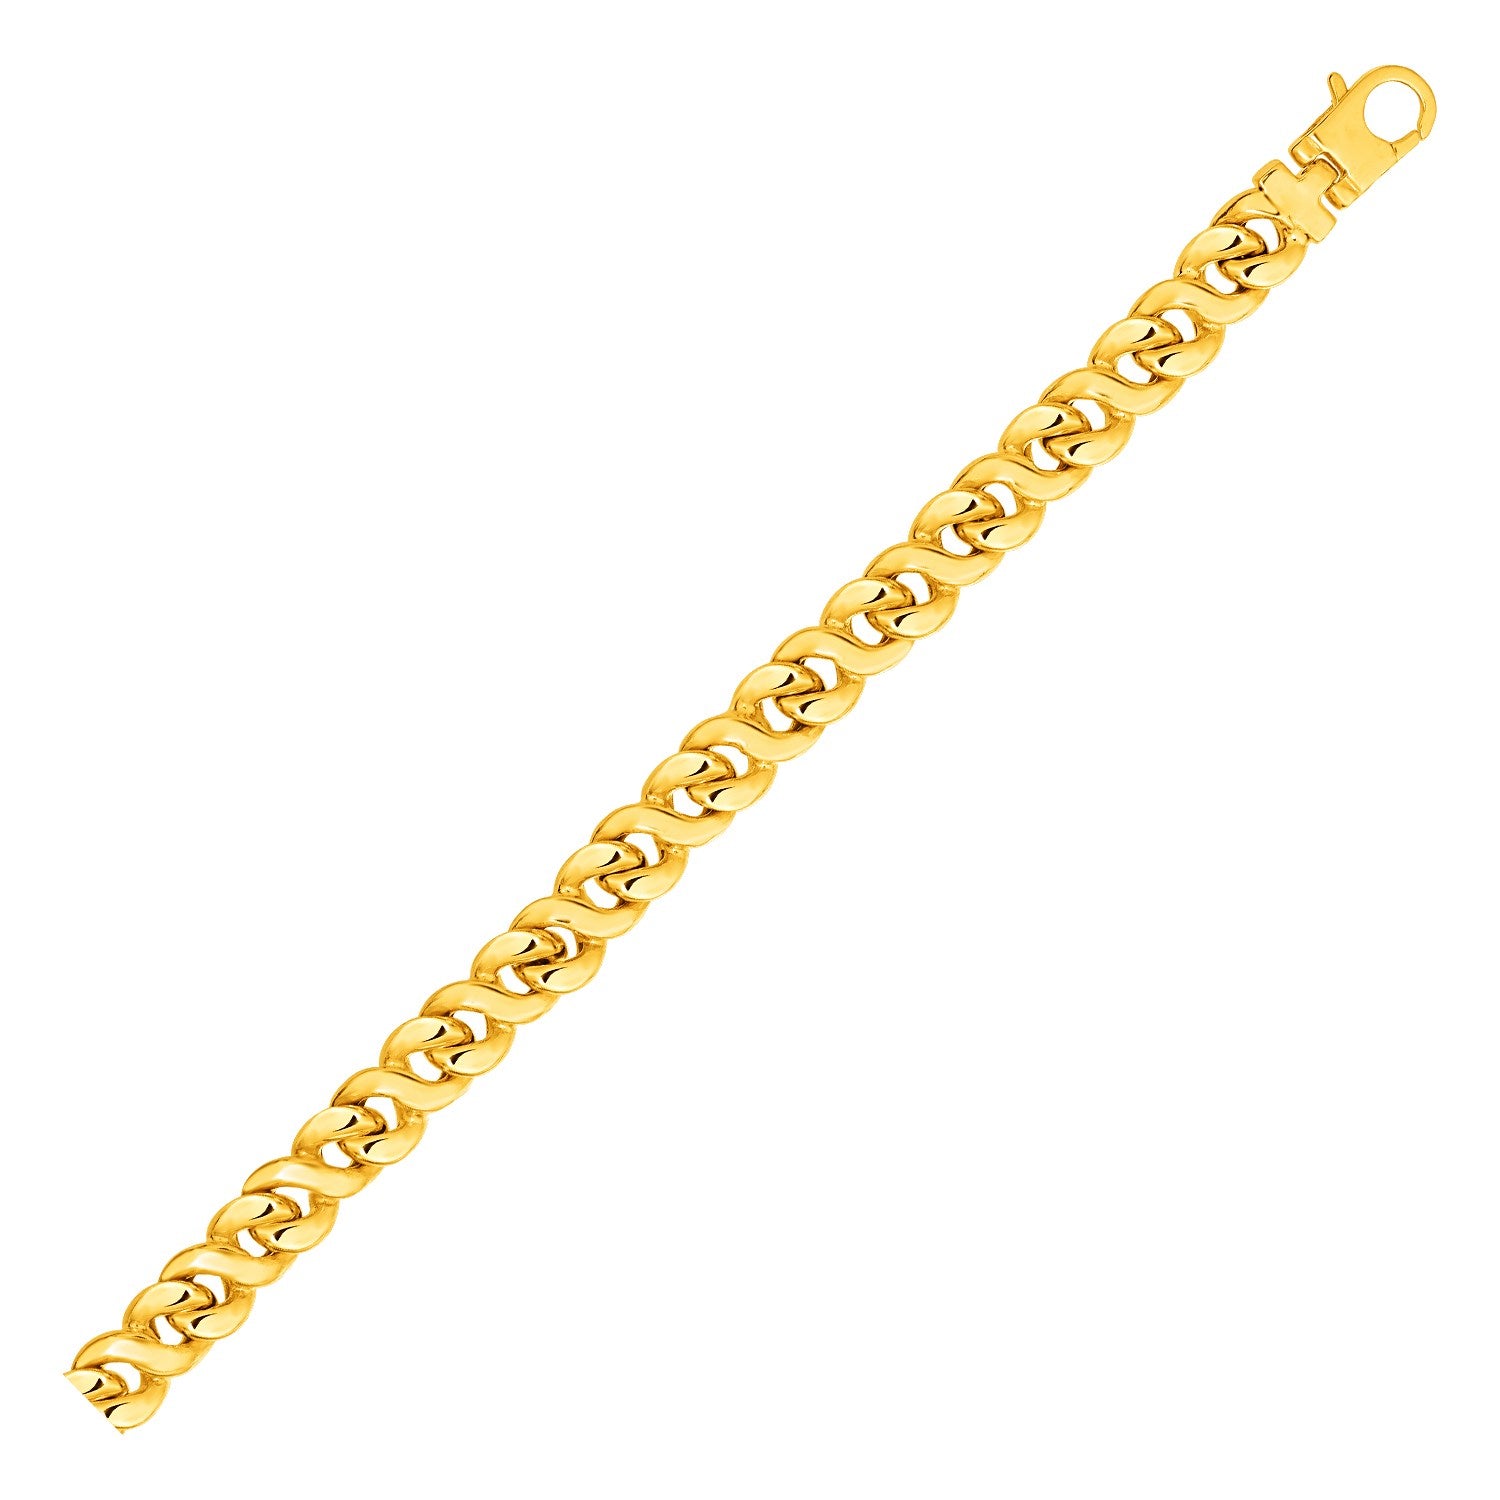 Mens Twisted Oval Link Bracelet in 14k Yellow Gold